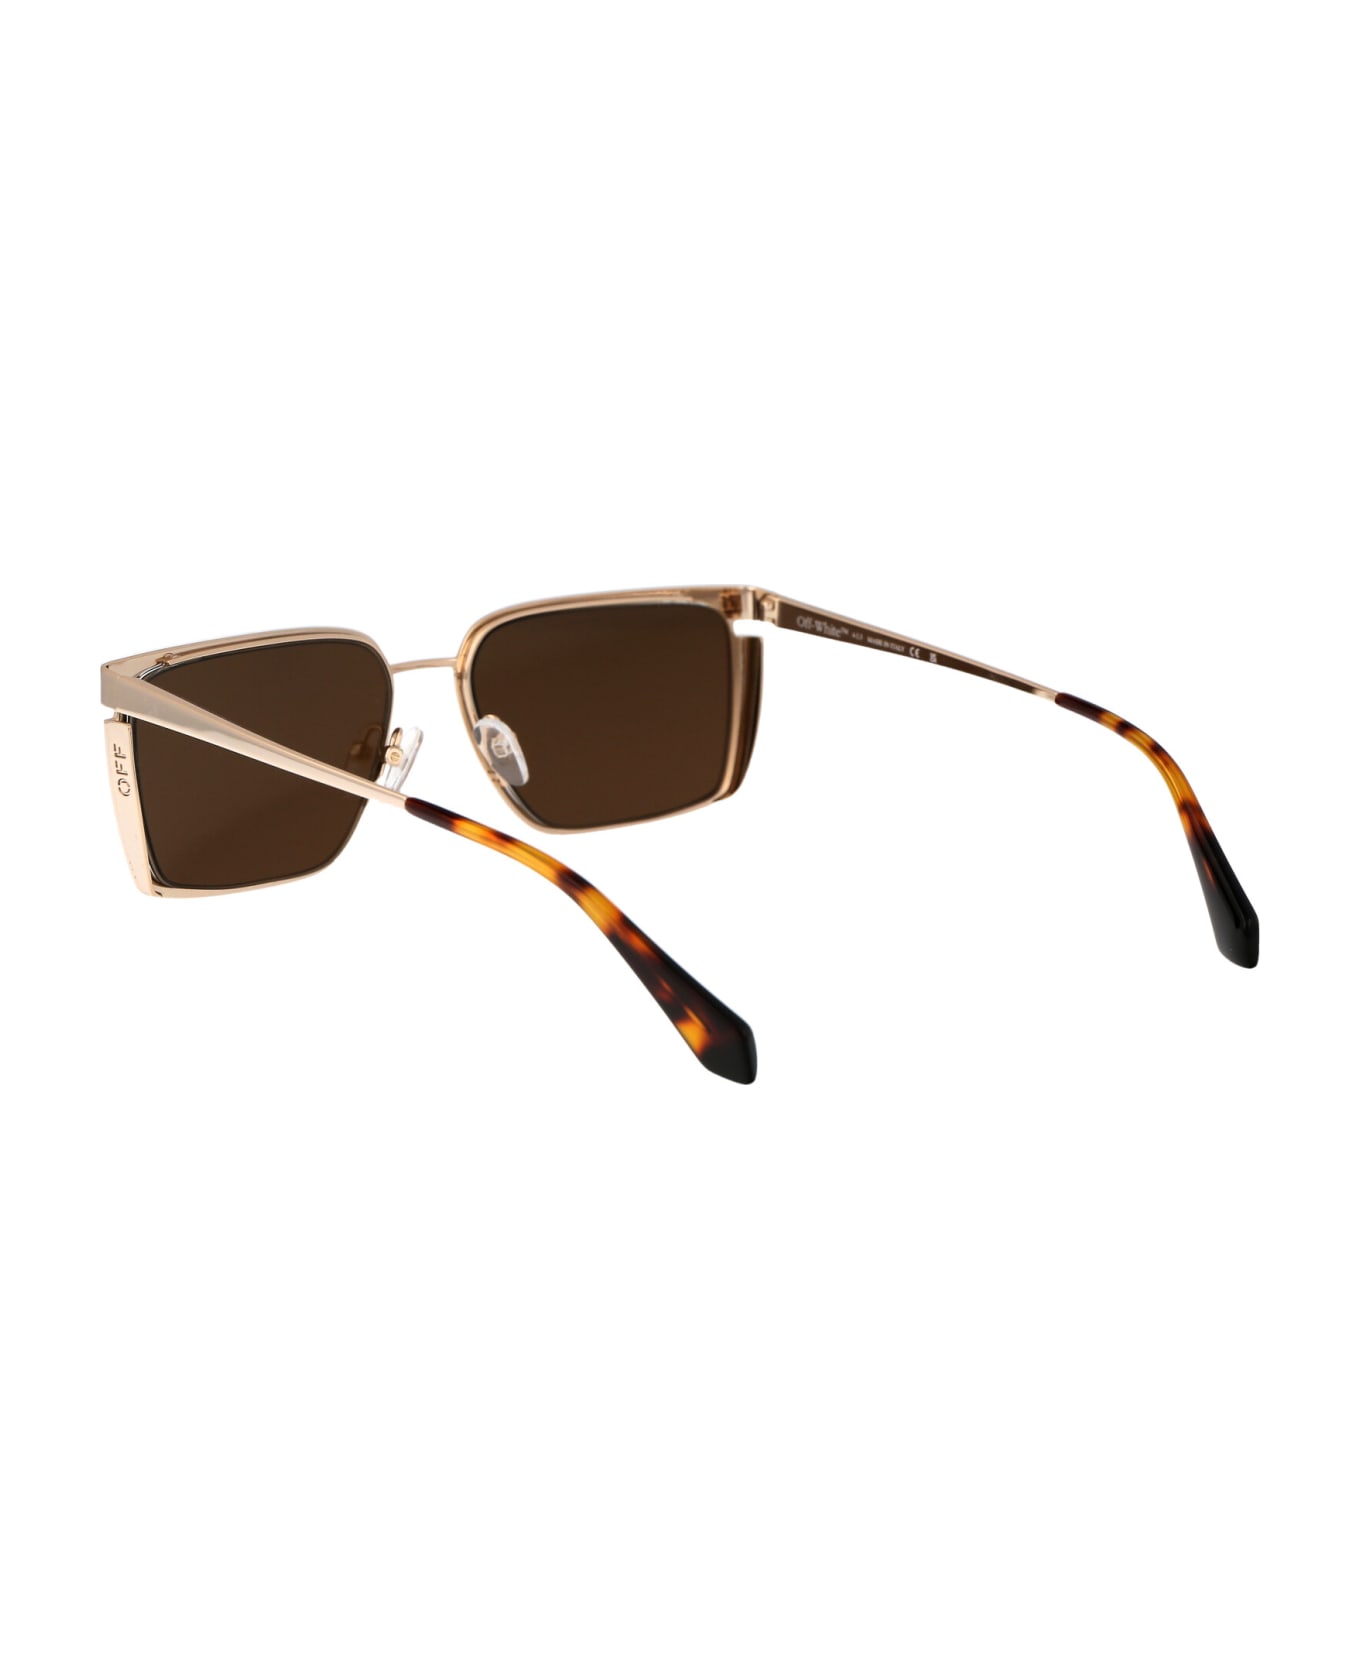 Off-White Yoder Sunglasses - 7676 GOLD GOLD 